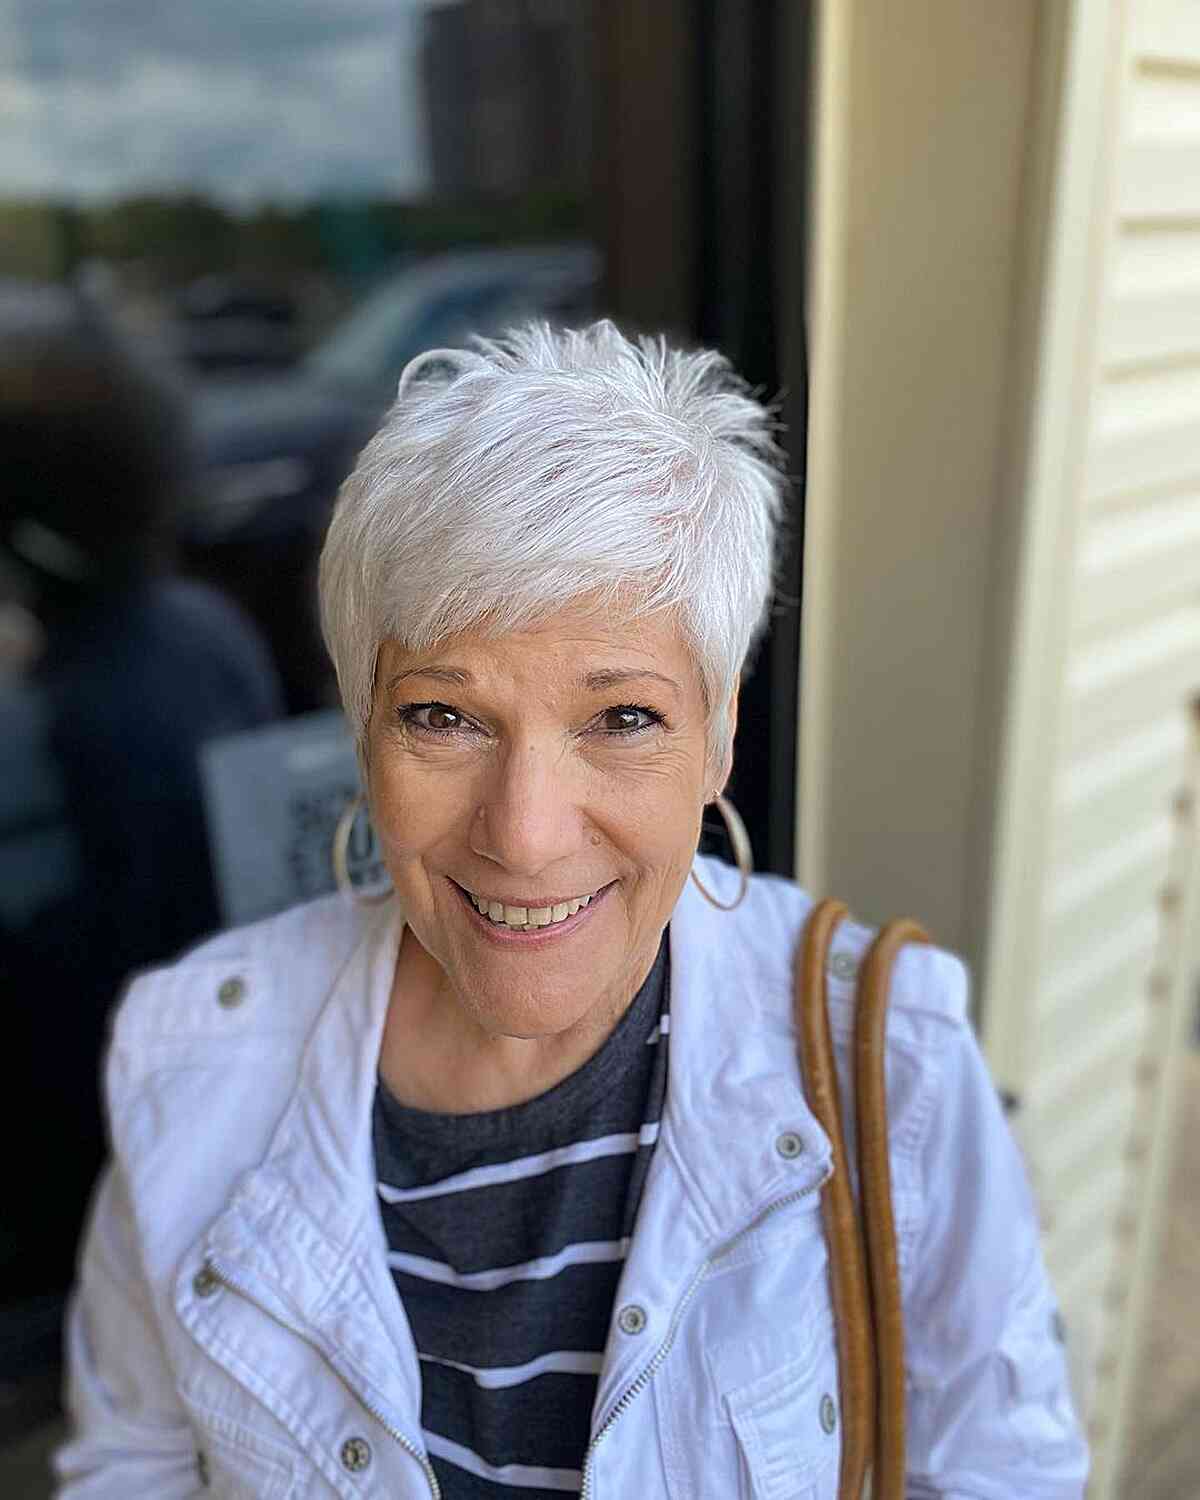 28 Trendy Short Haircuts for Older Women with Fine Hair to Boost Volume